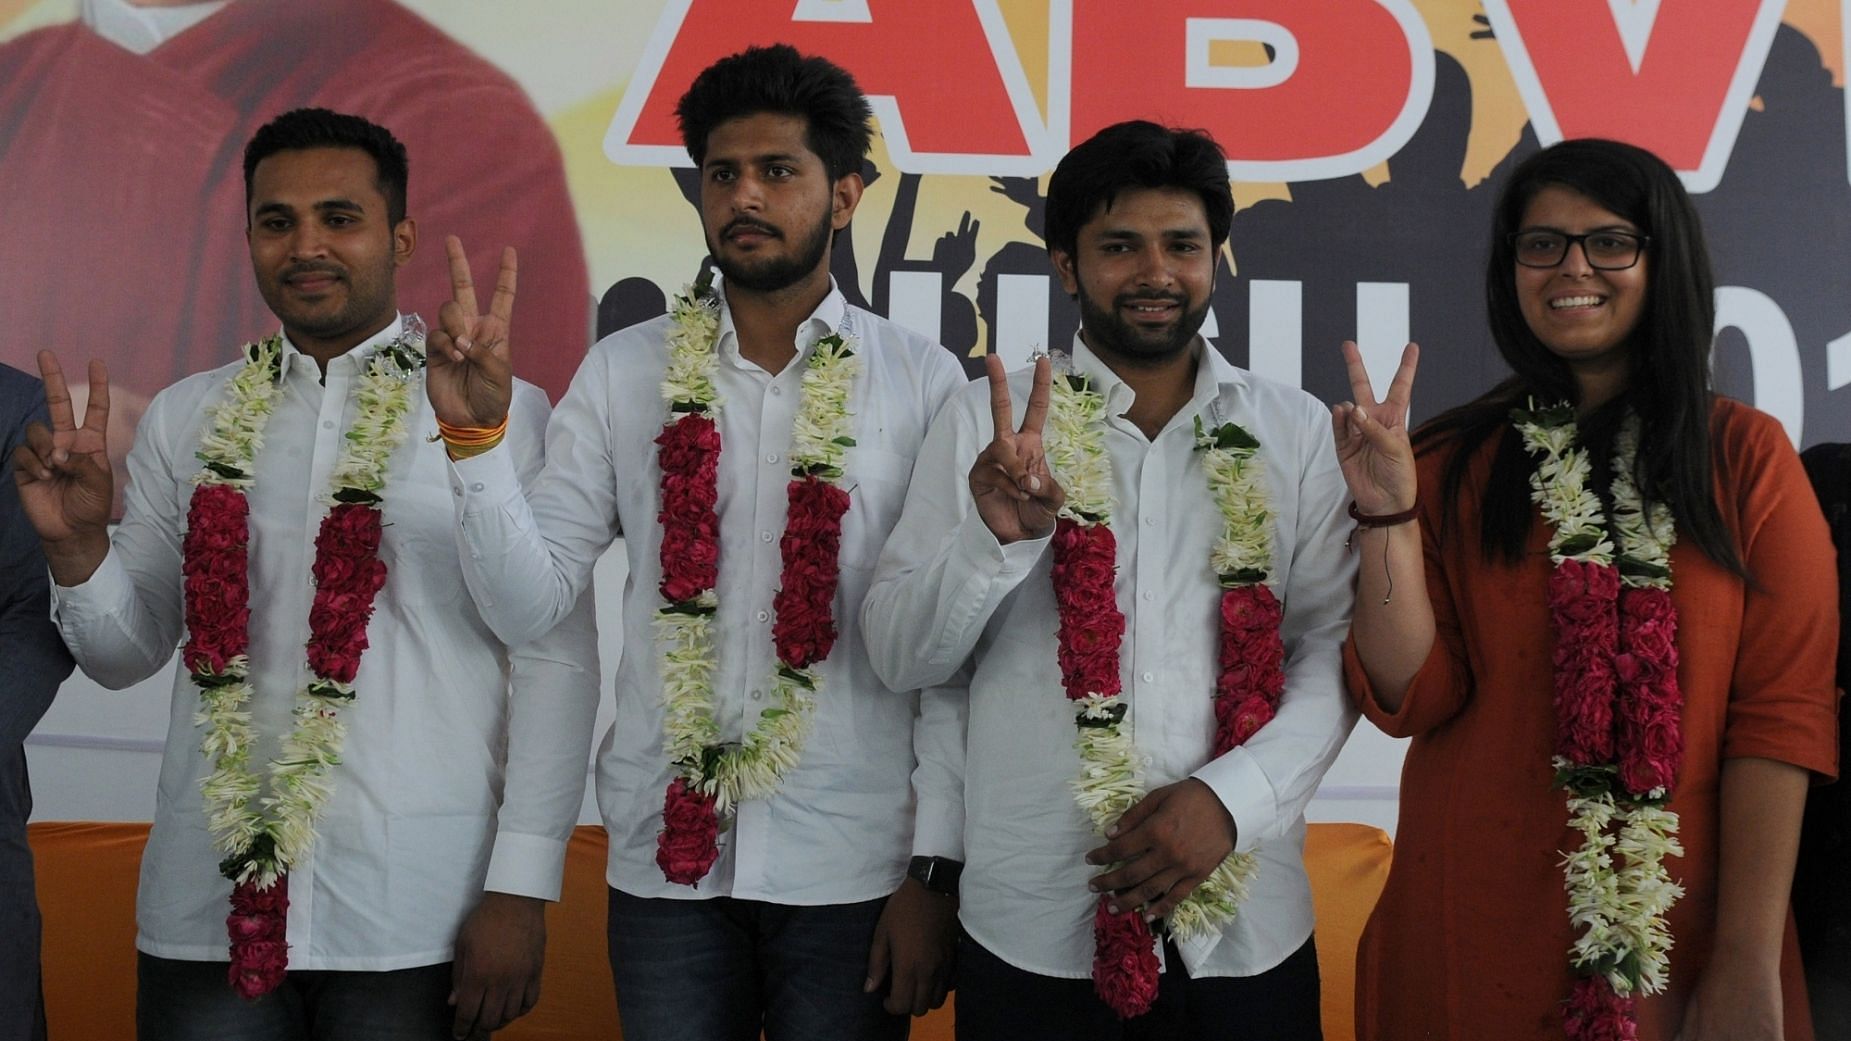 (L-R) ABVP candidates for the upcoming elections to DUSU - Akshit Dahiya for president, Pradeep Tanwar for vice-president, Yogit Rathee for secretary and Shivangi Kherwal for joint secretary.&nbsp;